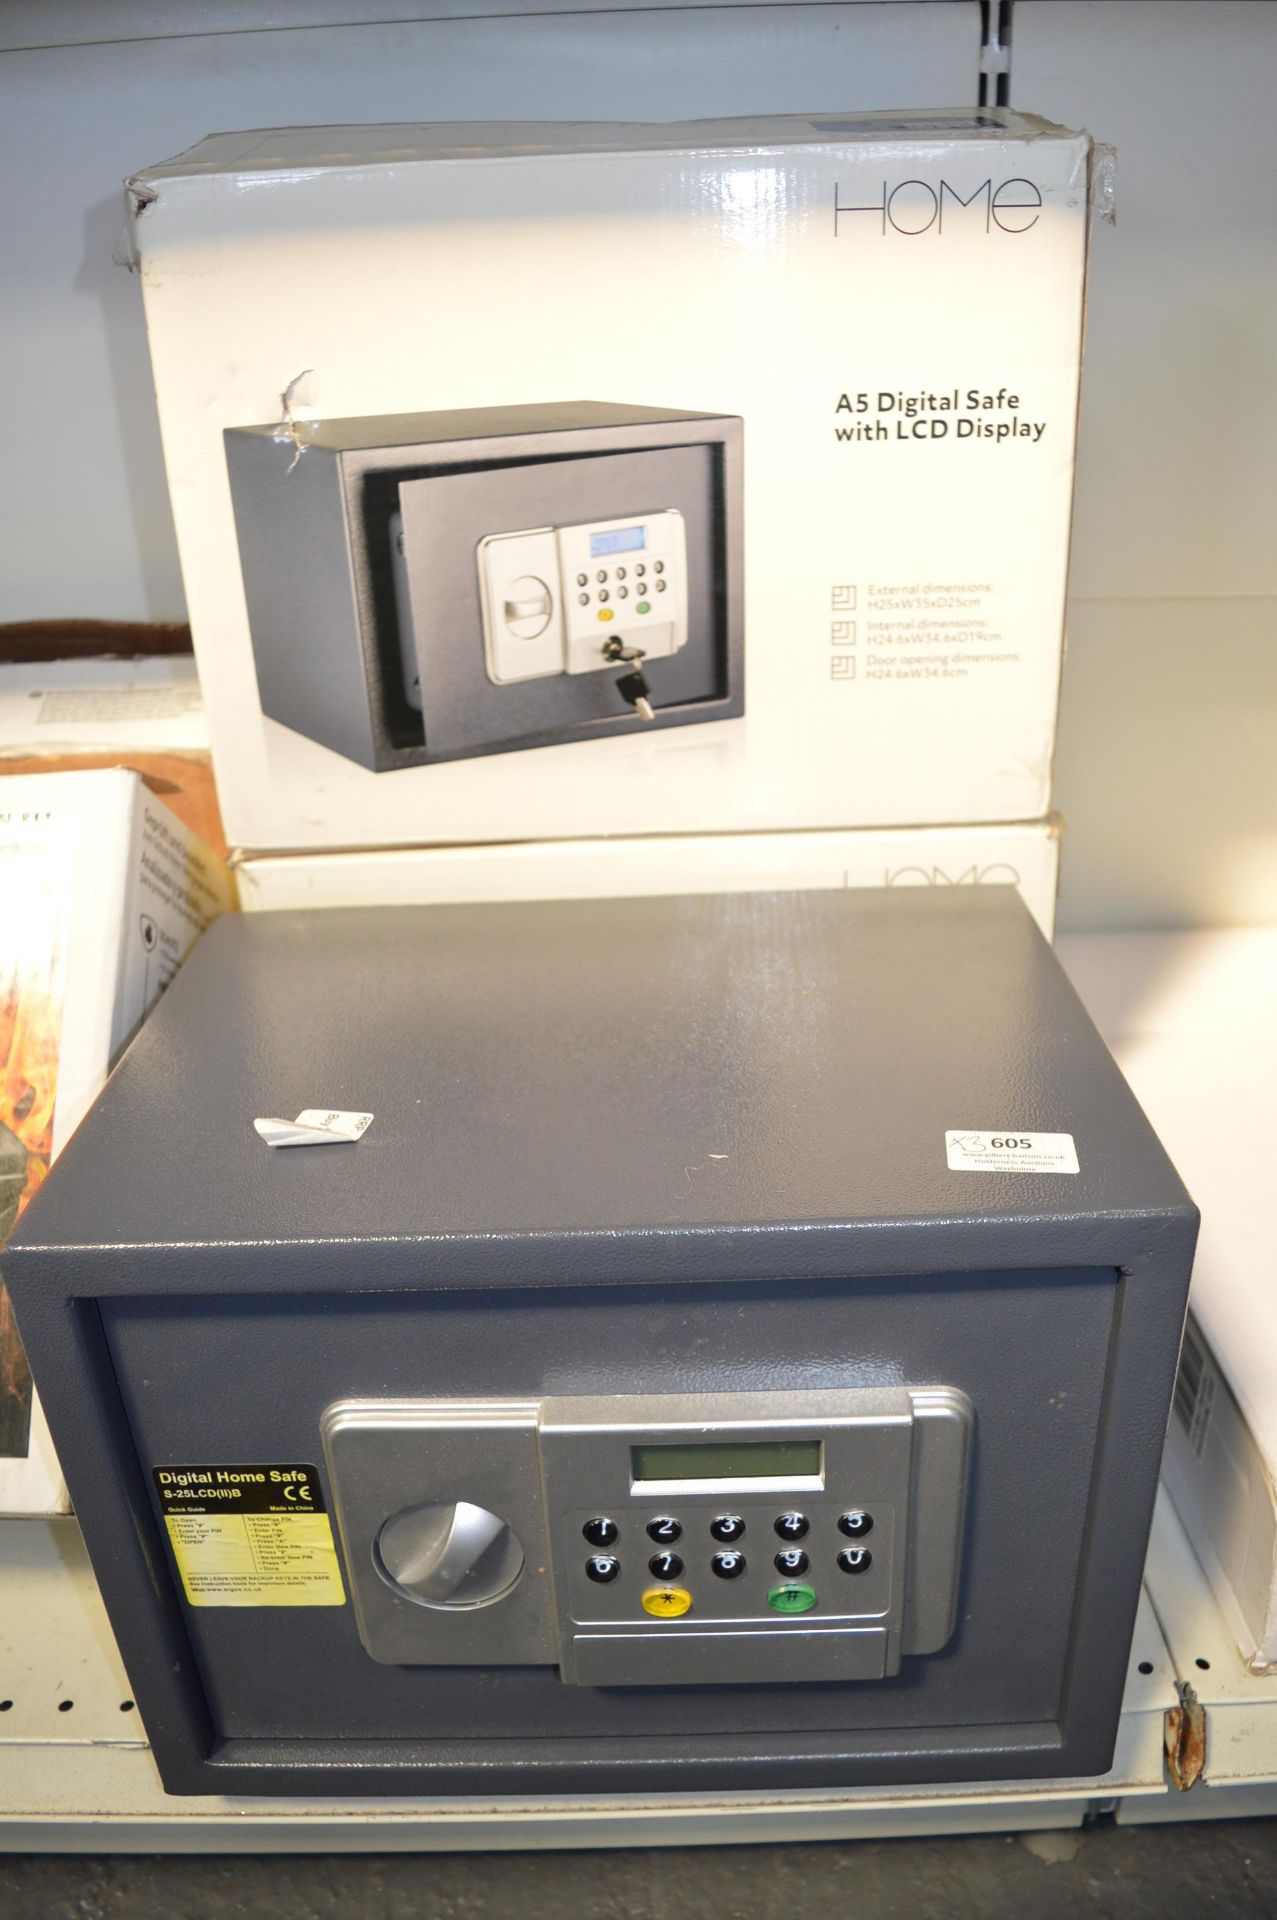 Three A5 Digital Safes with LCD Displays (one without key)